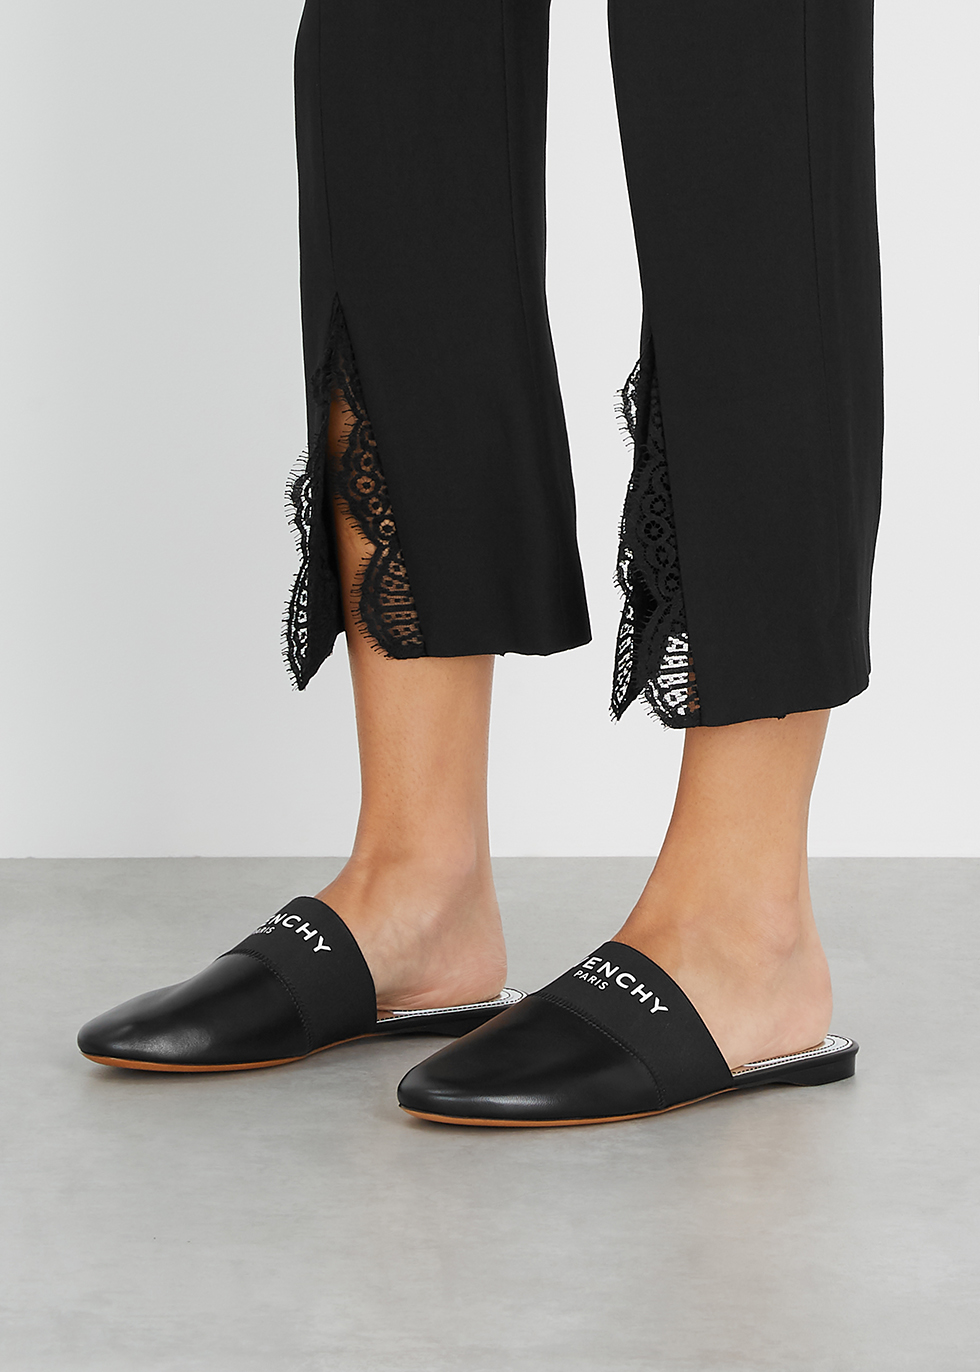 givenchy bedford slippers